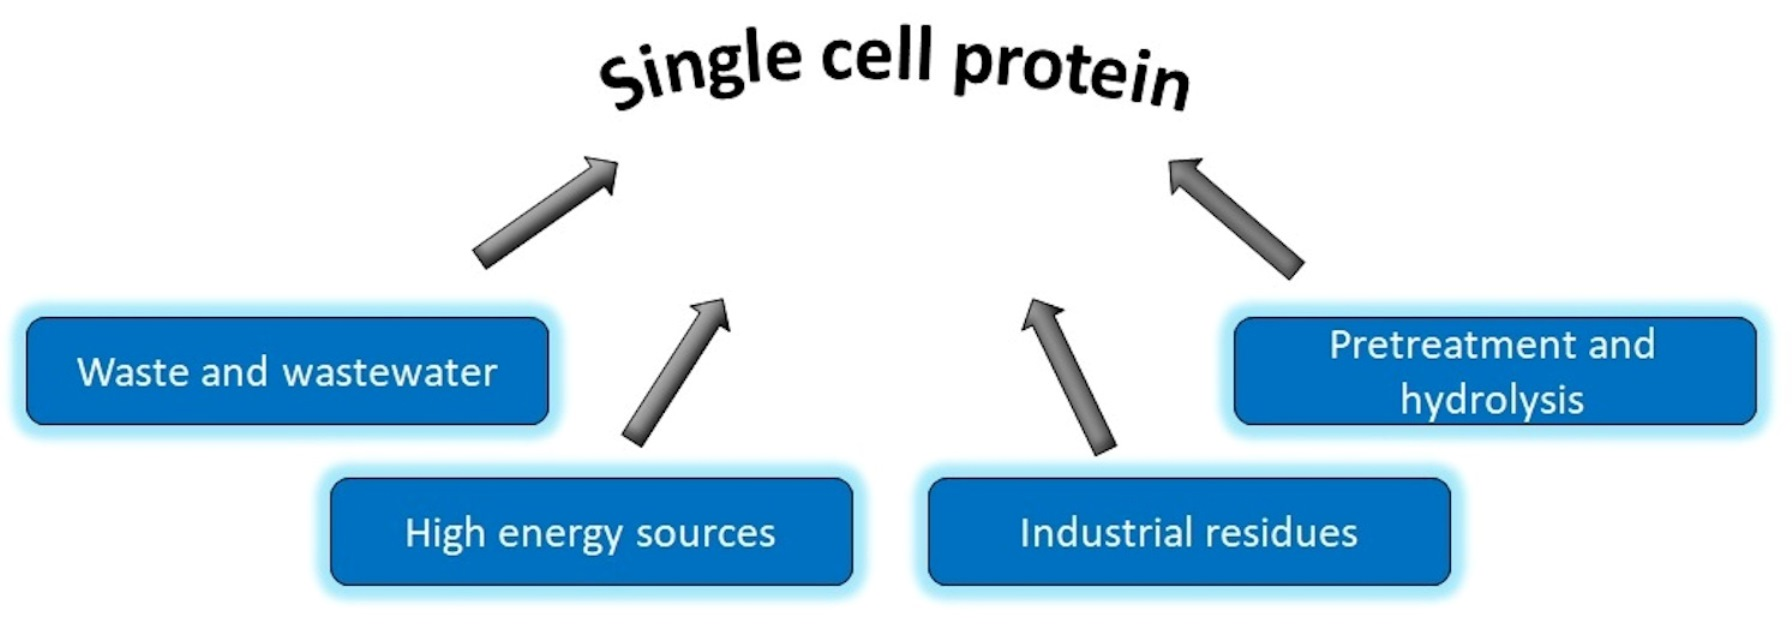 Life-cycle assessment of yeast-based single-cell protein production with  oat processing side-stream - ScienceDirect